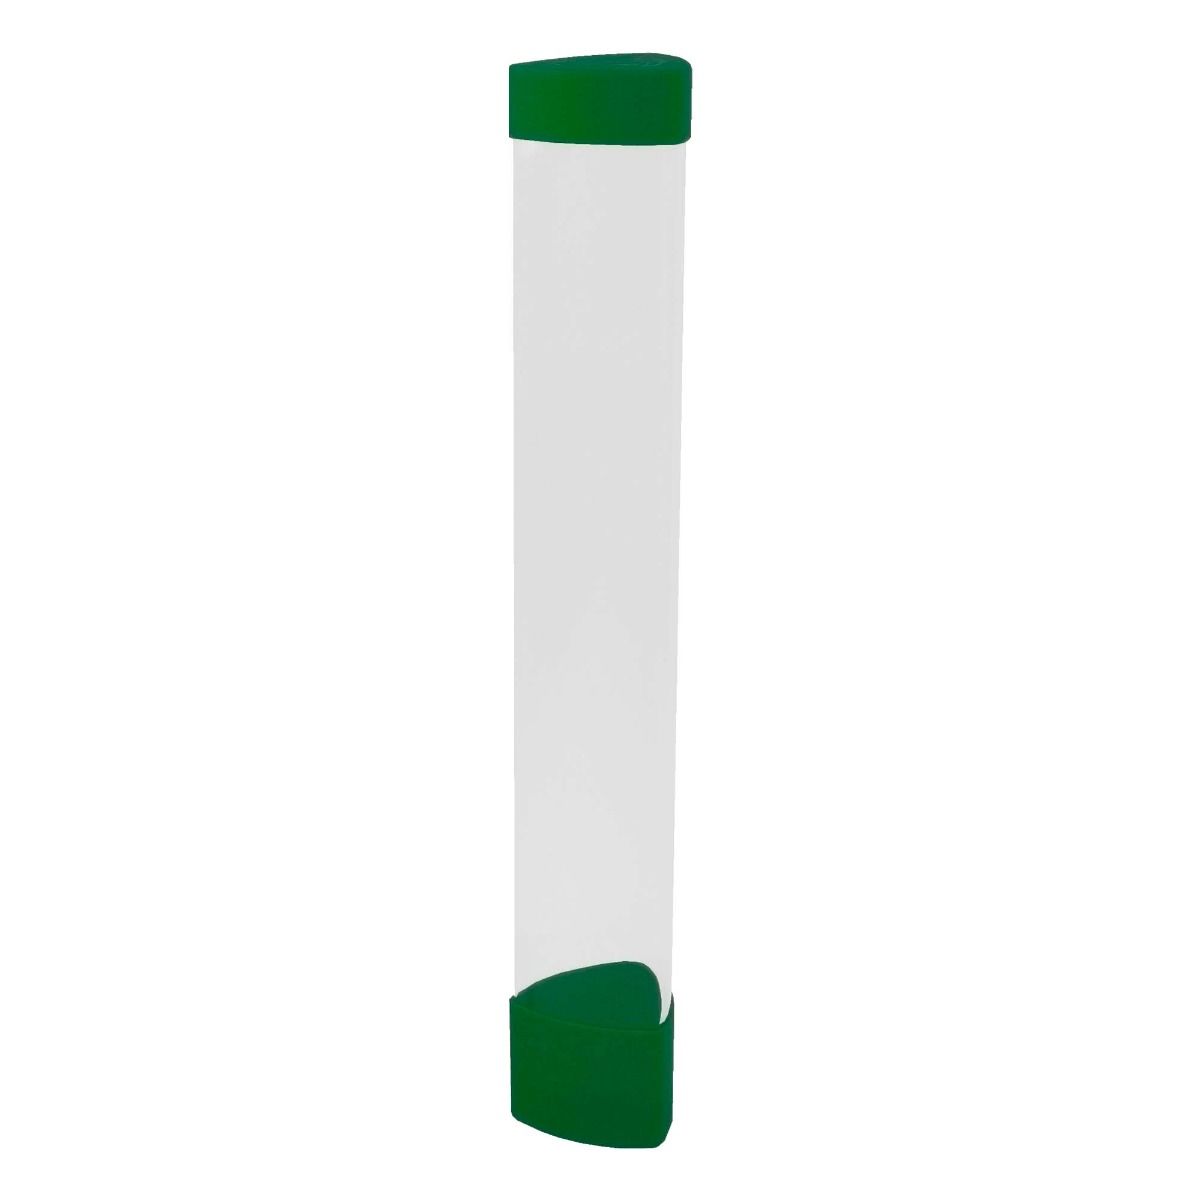 Playmat Tube Green with Dice Holder - Saltire Games